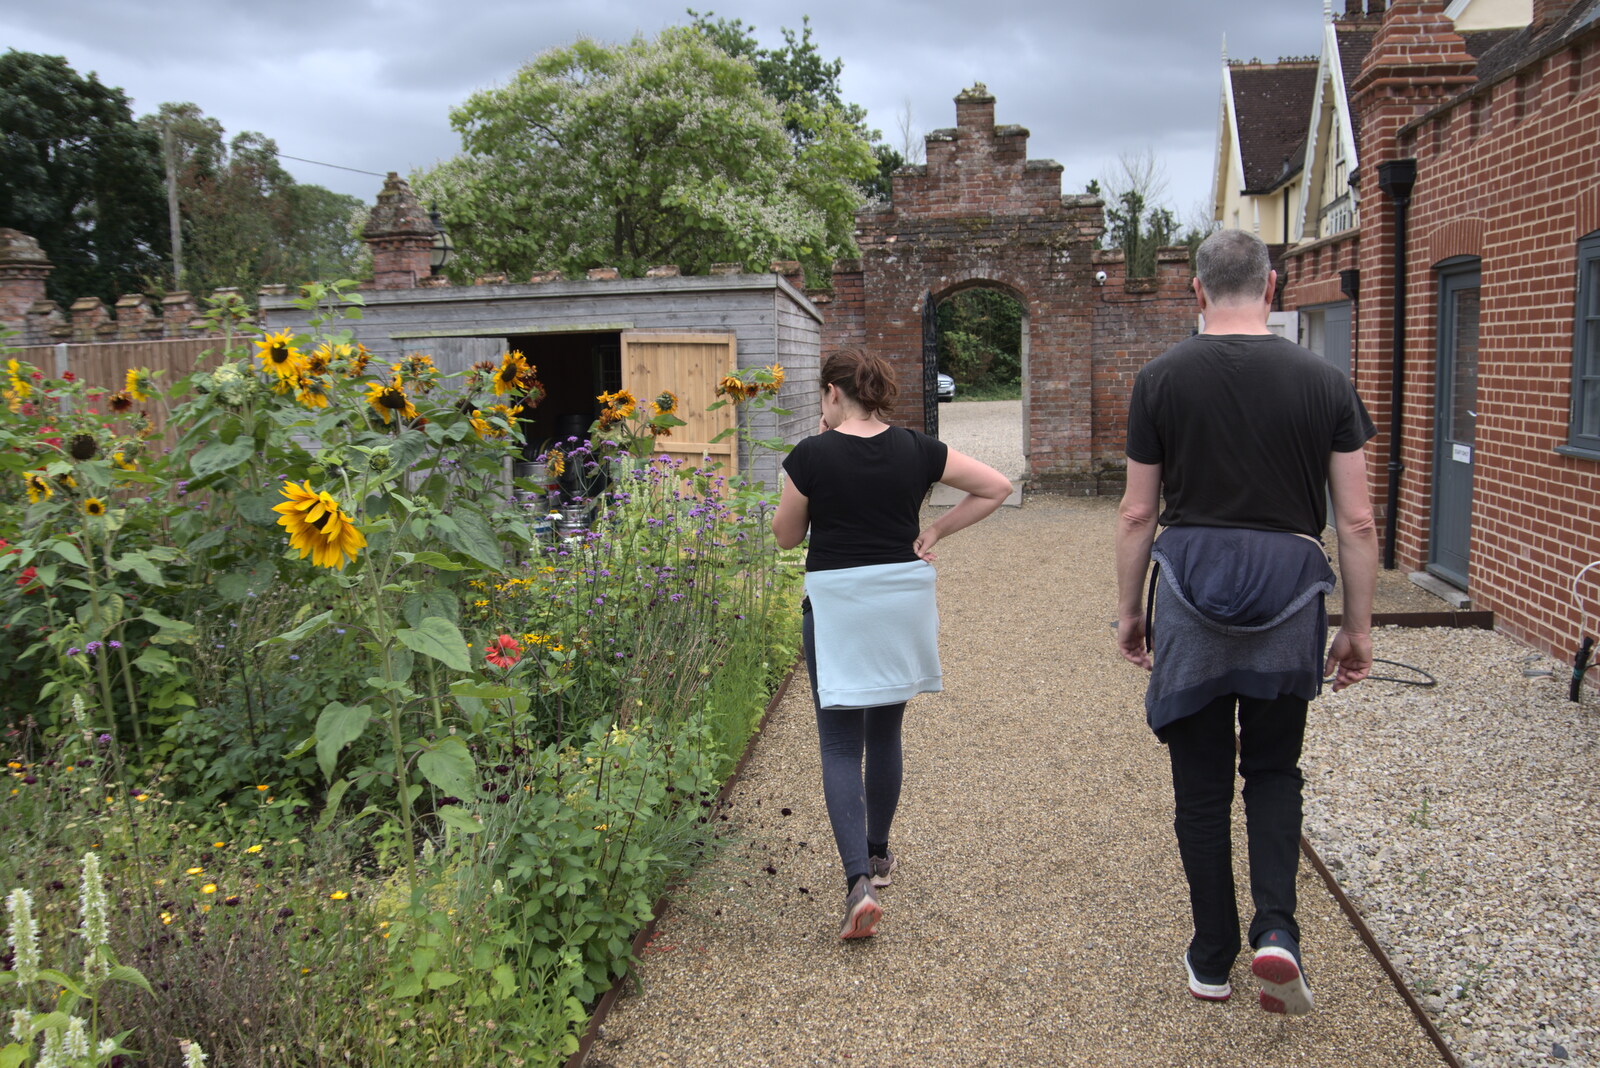 Walking past the sunflower flower bed from Meg-fest, and Sean Visits, Bressingham and Brome, Suffolk - 1st August 2021